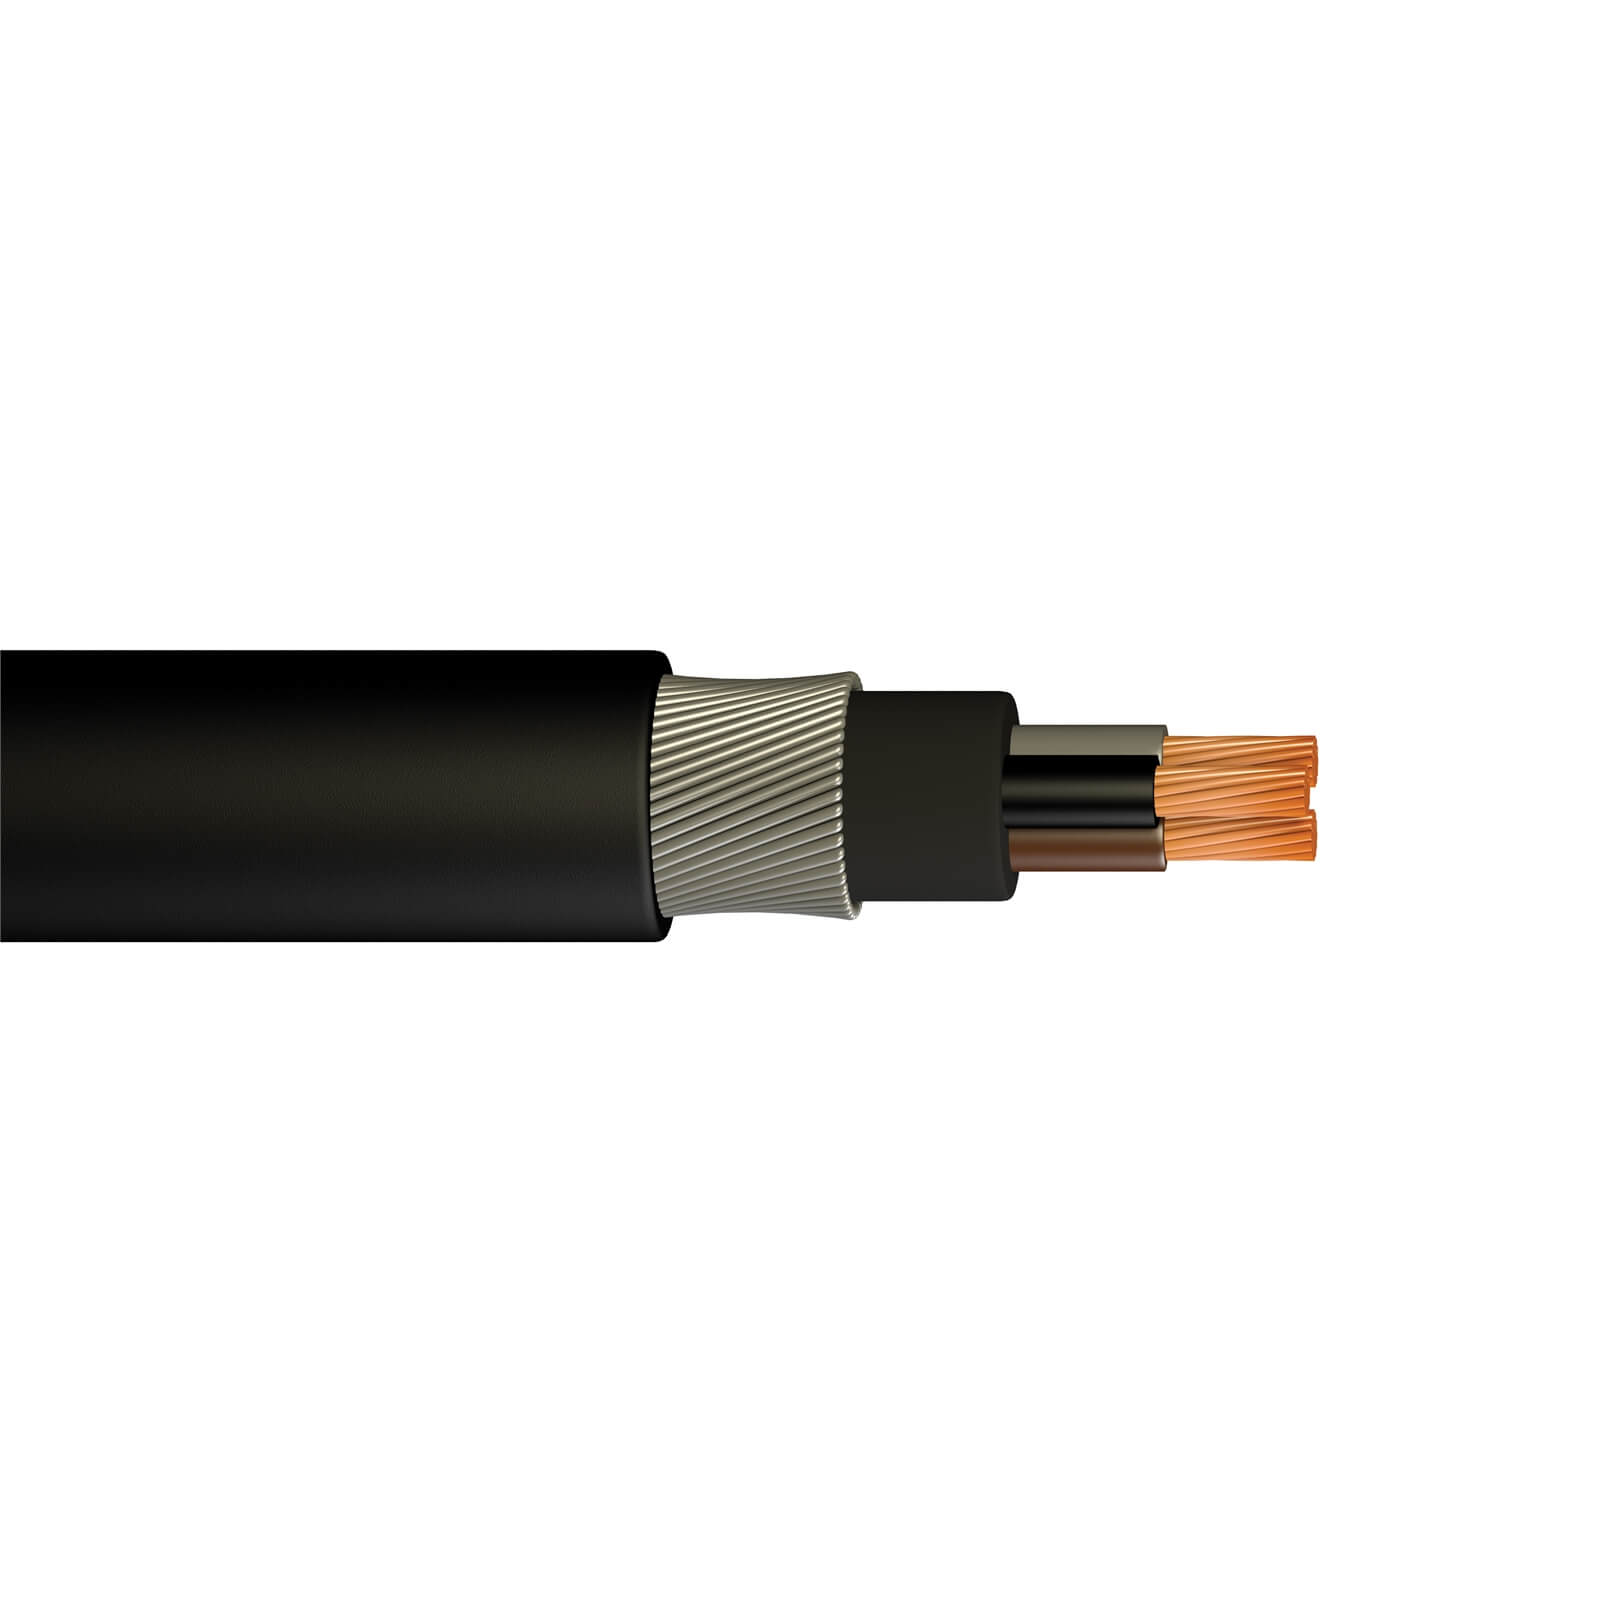 Pitacs 1.5mm 3 Core Steel Armoured Cable 25m Black 6943X